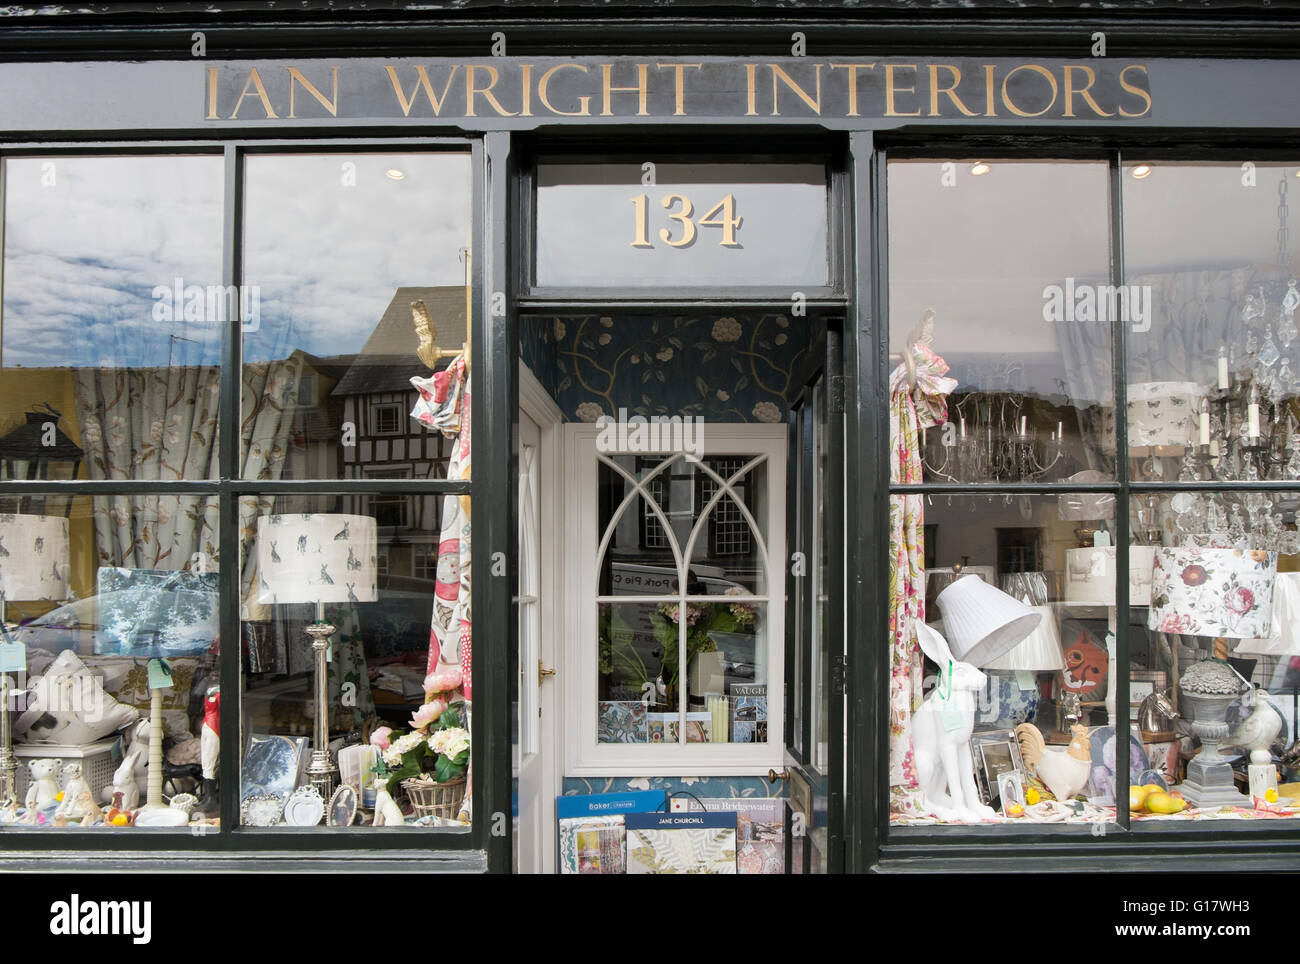 Ian Wright Interiors Shop On The Hill On The A361 Through